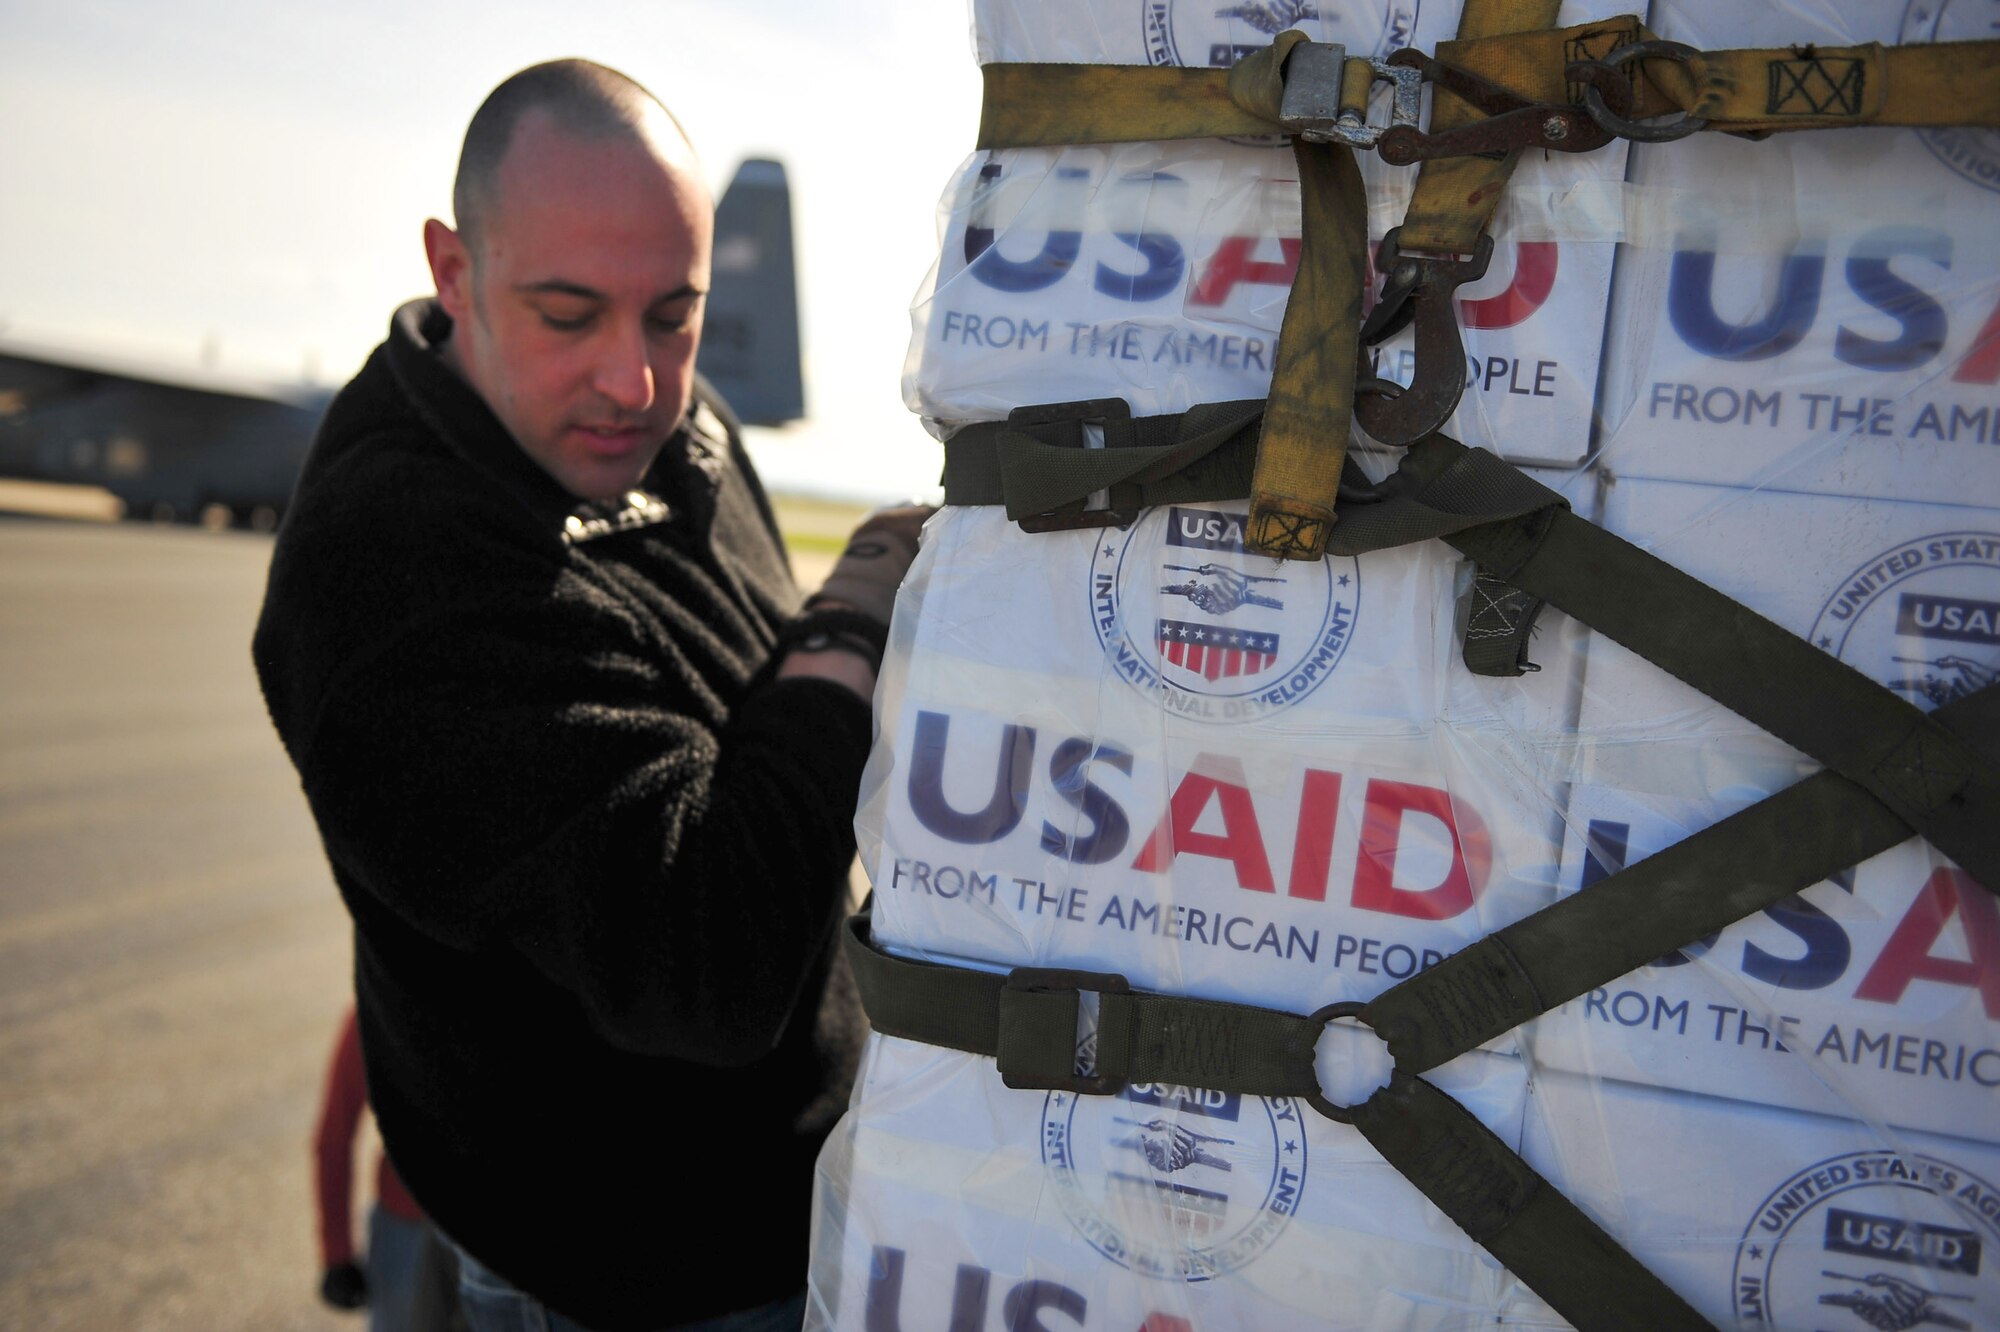 U.S. Airmen from the 435th Air Mobility Squadron, from Ramstein Air Base, Germany, load blankets, tarps and water containers onto C-130 aircraft in Pisa, Italy, March 4, 2011. The aircraft flew the supplies to Tunisia as part of the U.S. government's efforts with the international community to meet the humanitarian needs of the Lybian people and others in the country who fled across the borders during political uprisings. (U.S. Army photo by Staff Sgt. Brendan Stephens)  
